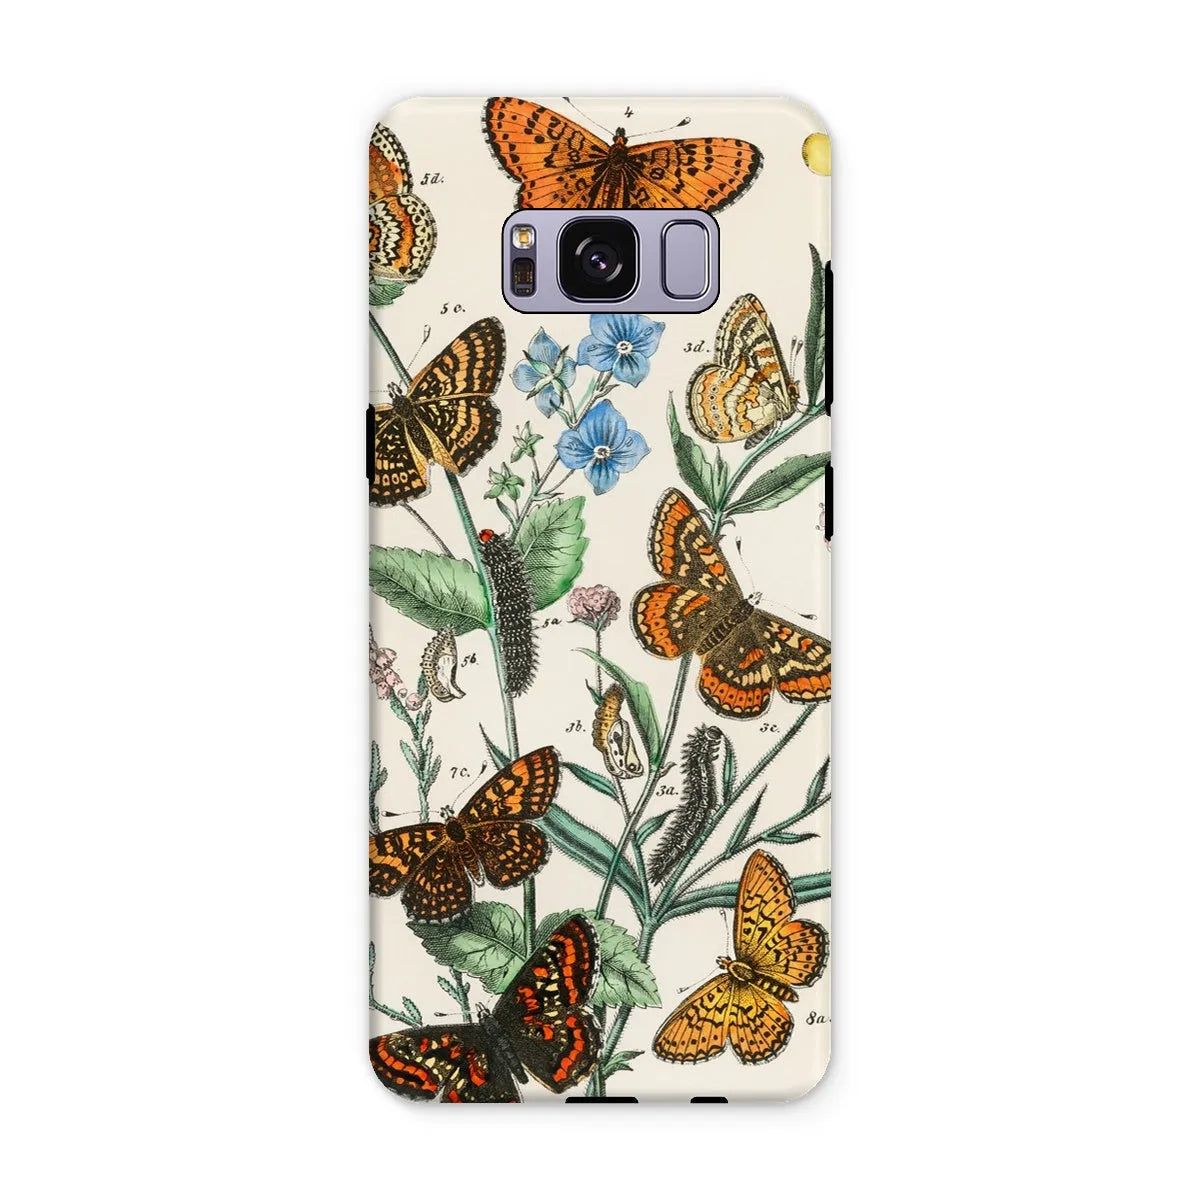 This Butterfly Aesthetic Art Phone Case - William Forsell Kirby - Samsung Galaxy S8 Plus / Matte - Mobile Phone Cases